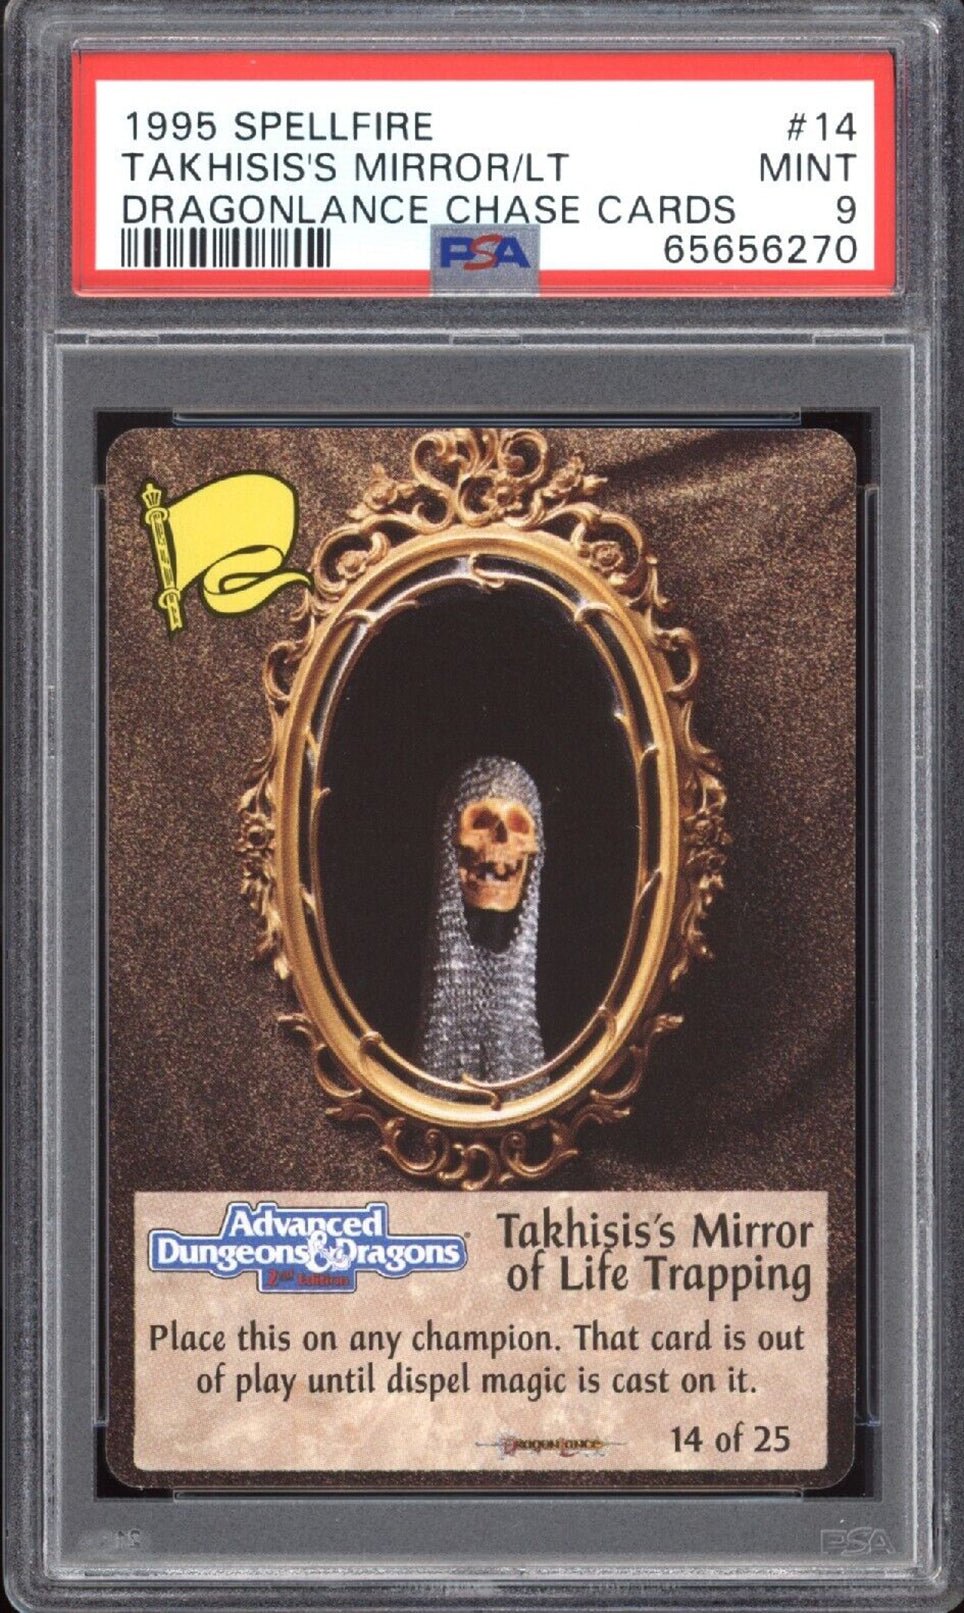 TAKHISIS'S MIRROR OF LIFE TRAPPING PSA 9 1994 Spellfire Dragonlance RARE Chase #14 Dungeons & Dragons Base Graded Cards - Hobby Gems